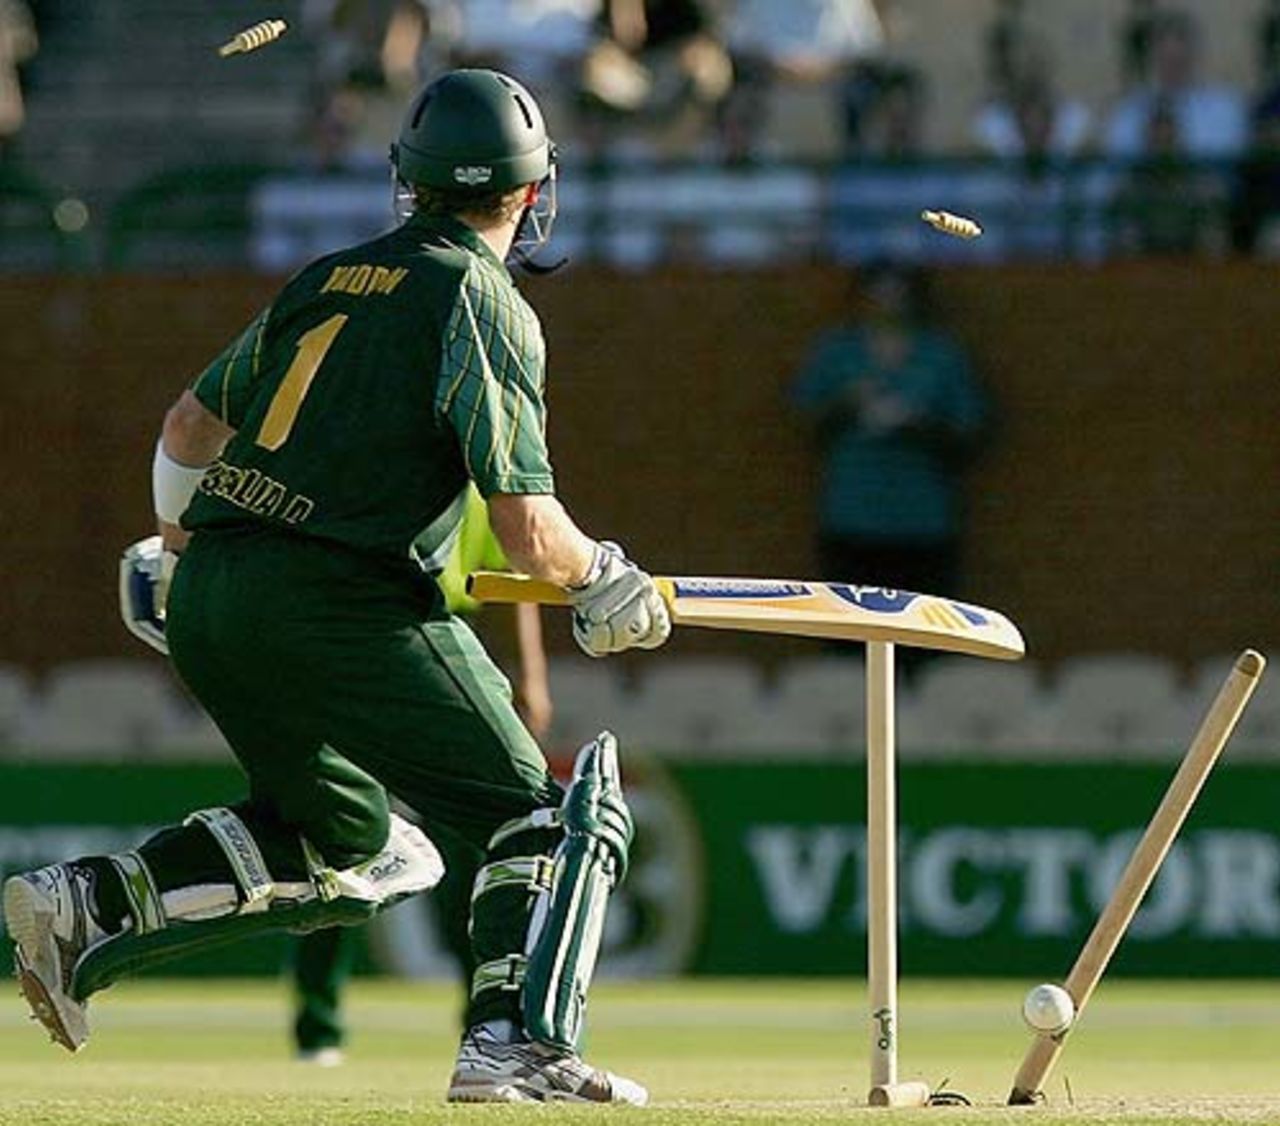 Brad Haddin sets off for a bye after being bowled off a free hit, Australia A v Pakistanis, Twenty20, Adelaide, January 13, 2005